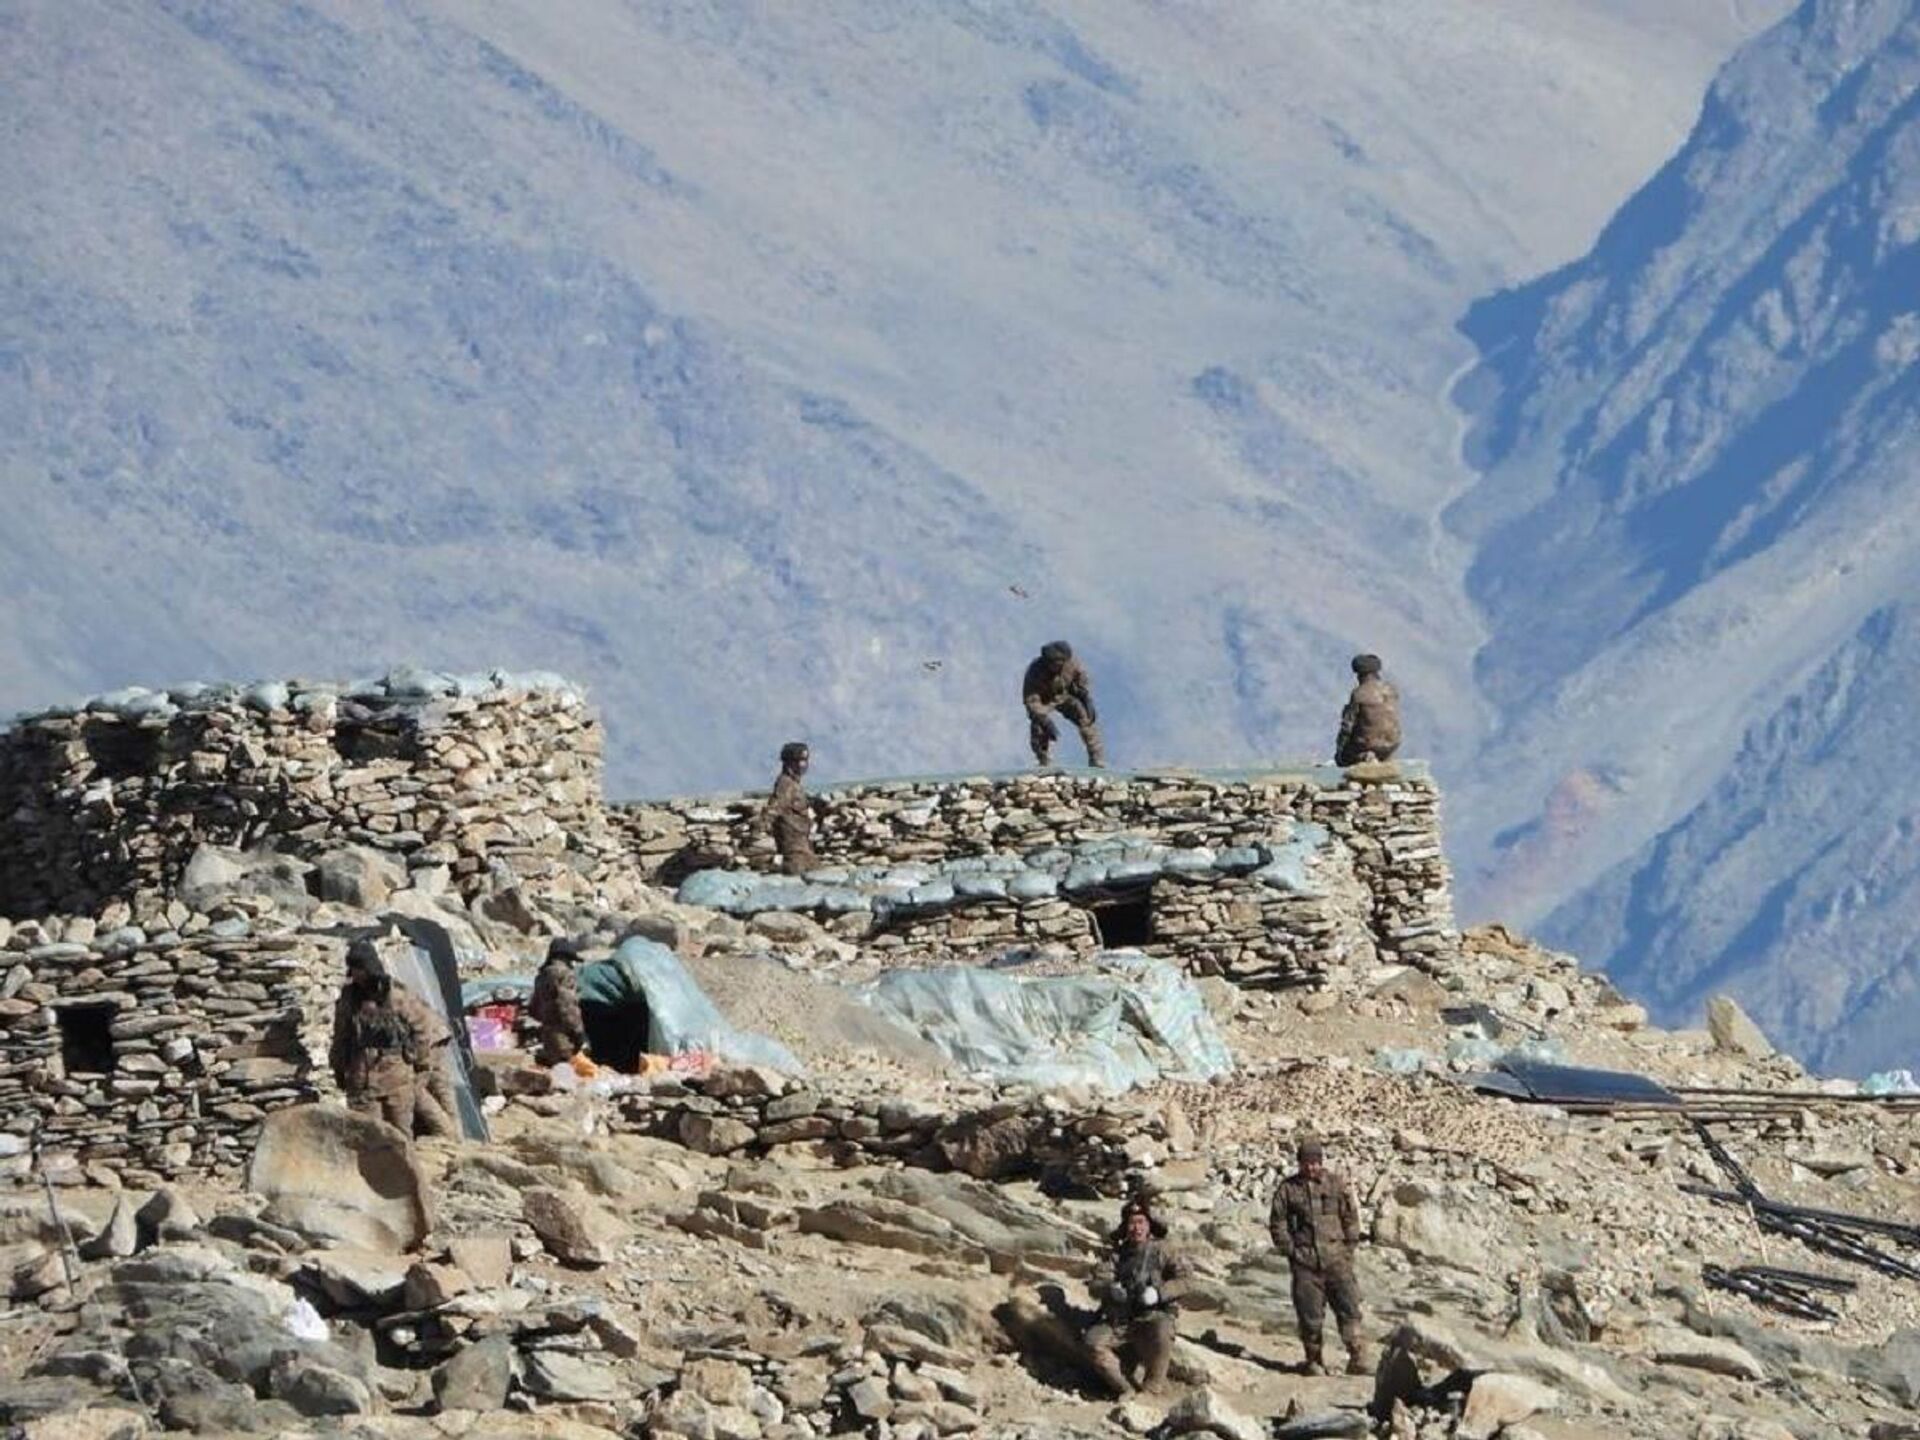 This photograph provided by the Indian Army, according to them shows Chinese troops dismantling their bunkers at Pangong Tso region, in Ladakh along the India-China border on Monday, Feb.15, 2021 - Sputnik International, 1920, 07.09.2021